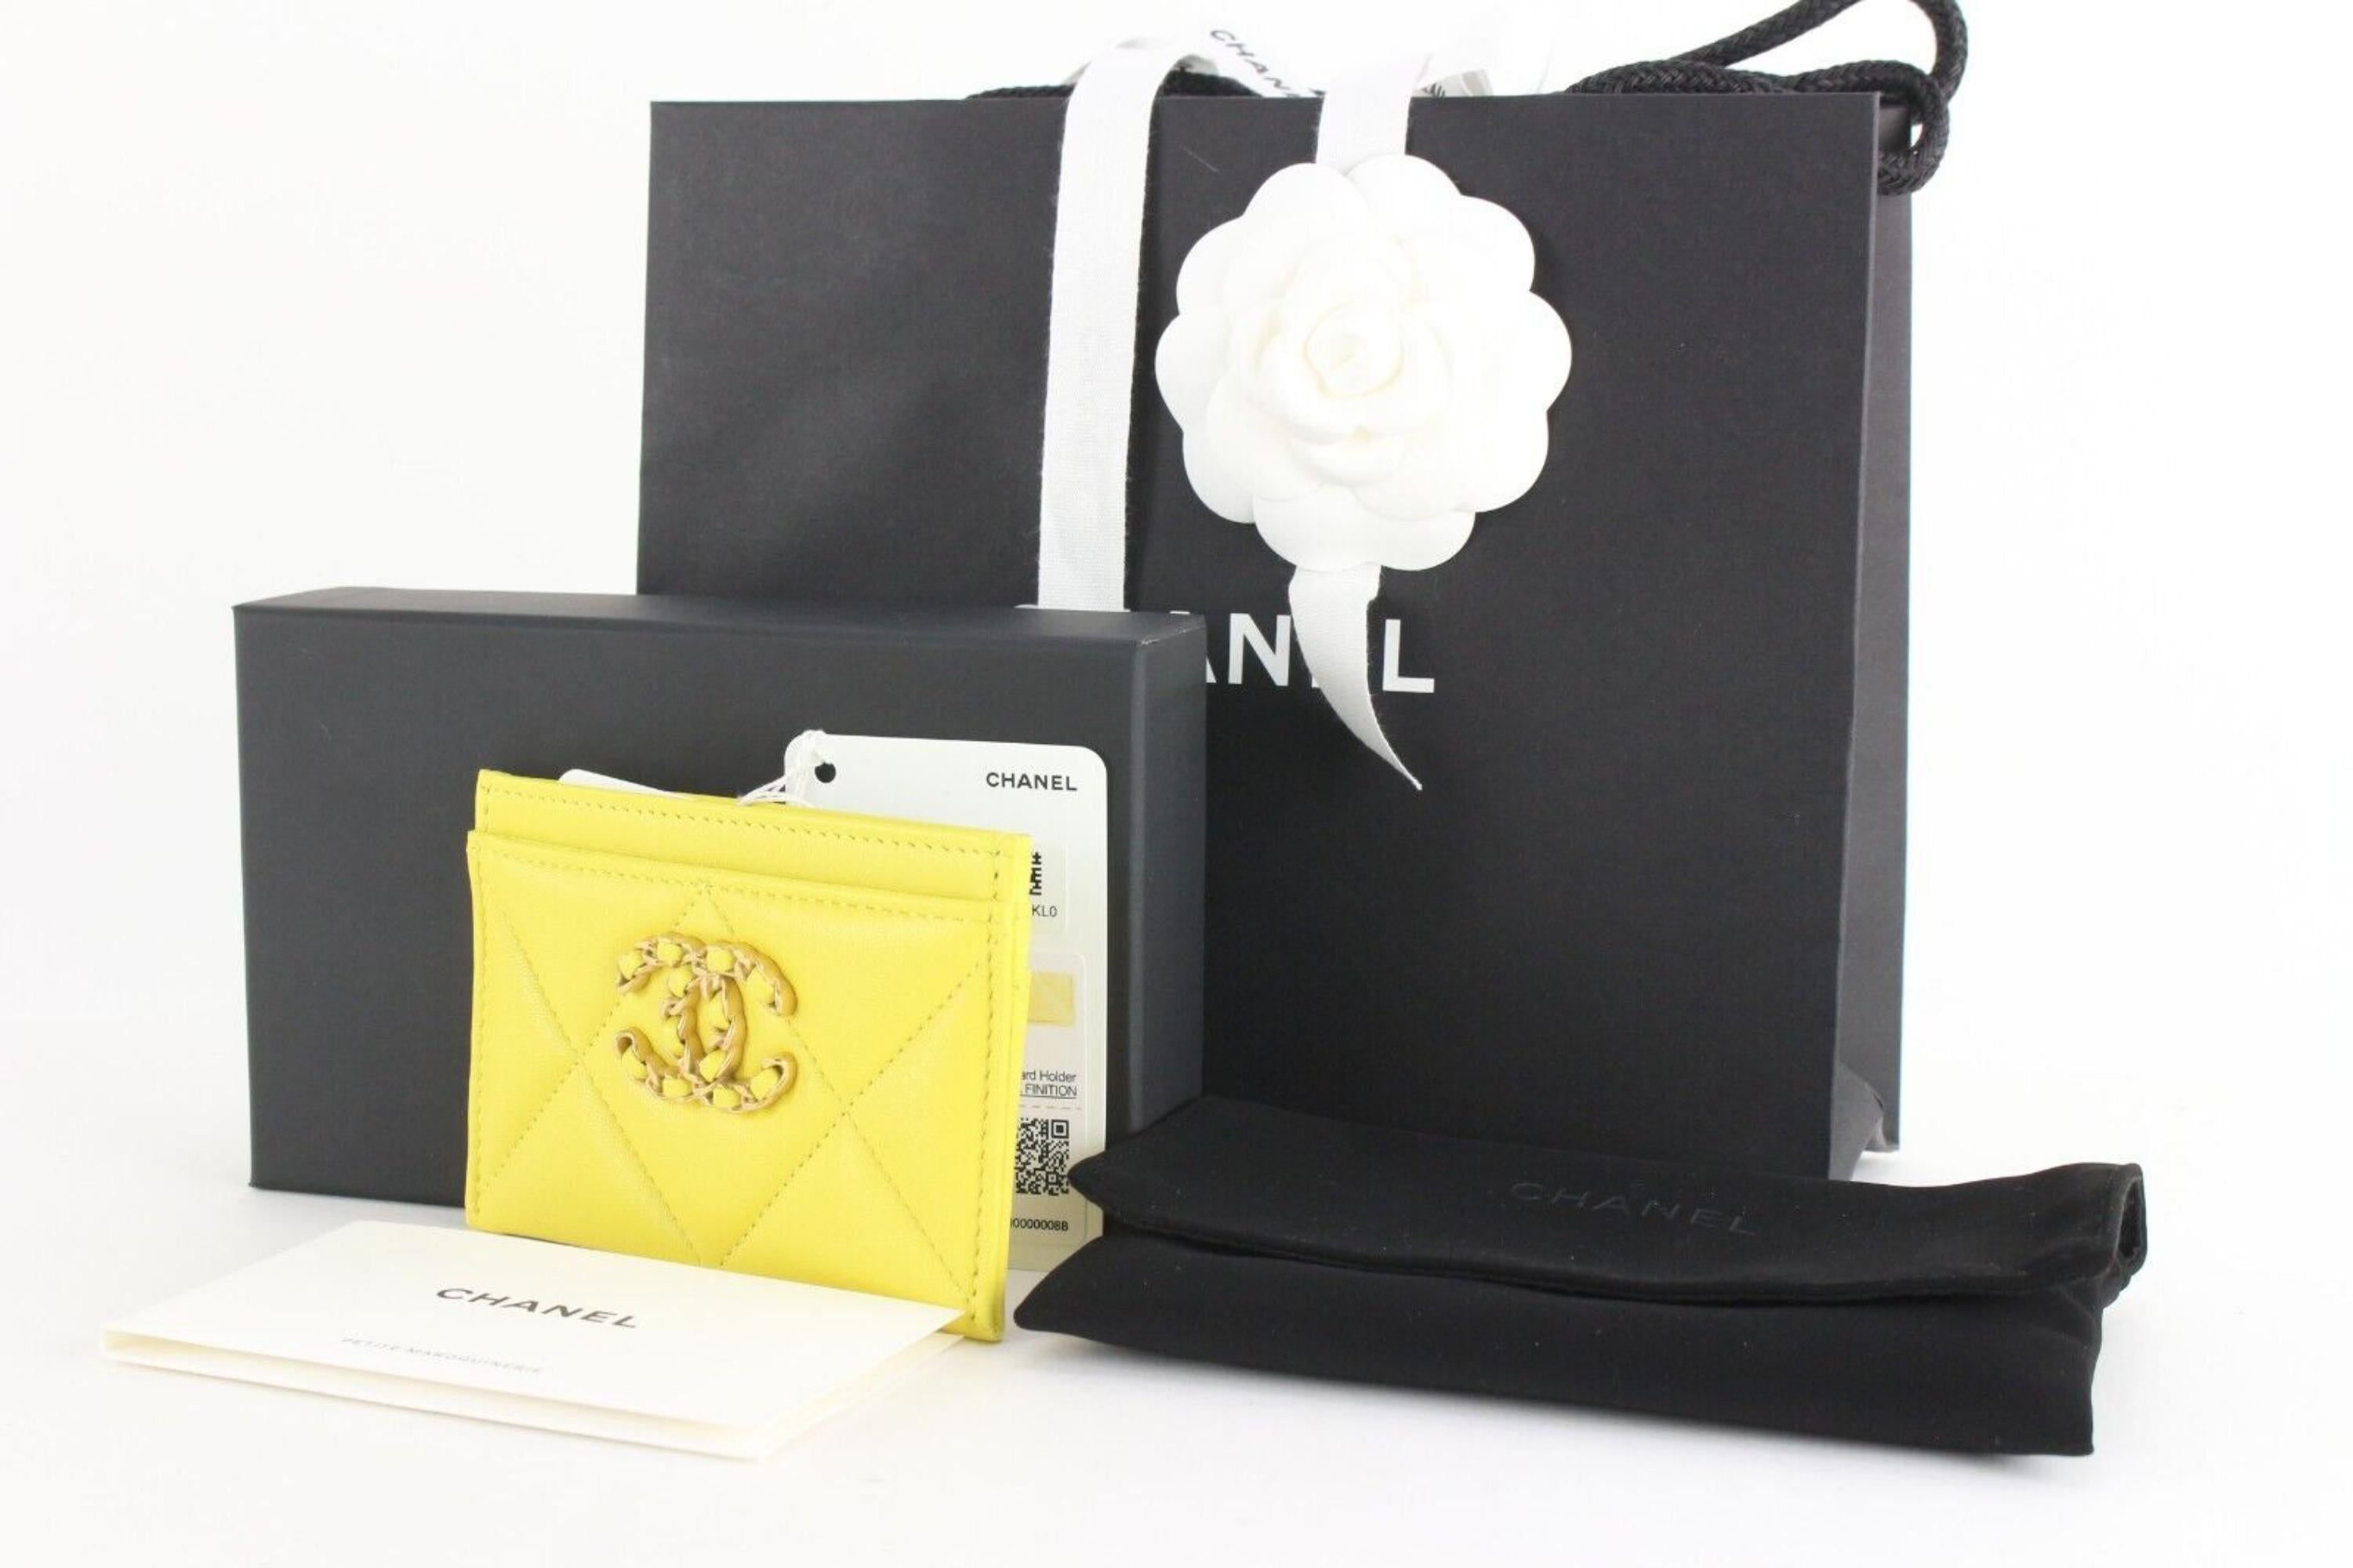 Chanel 2023 Rare Bright Yellow Leather 19 Card Holder 1CC55a
Date Code/Serial Number: EU0LCKL0

Made In: Spain

Measurements: Length:  4